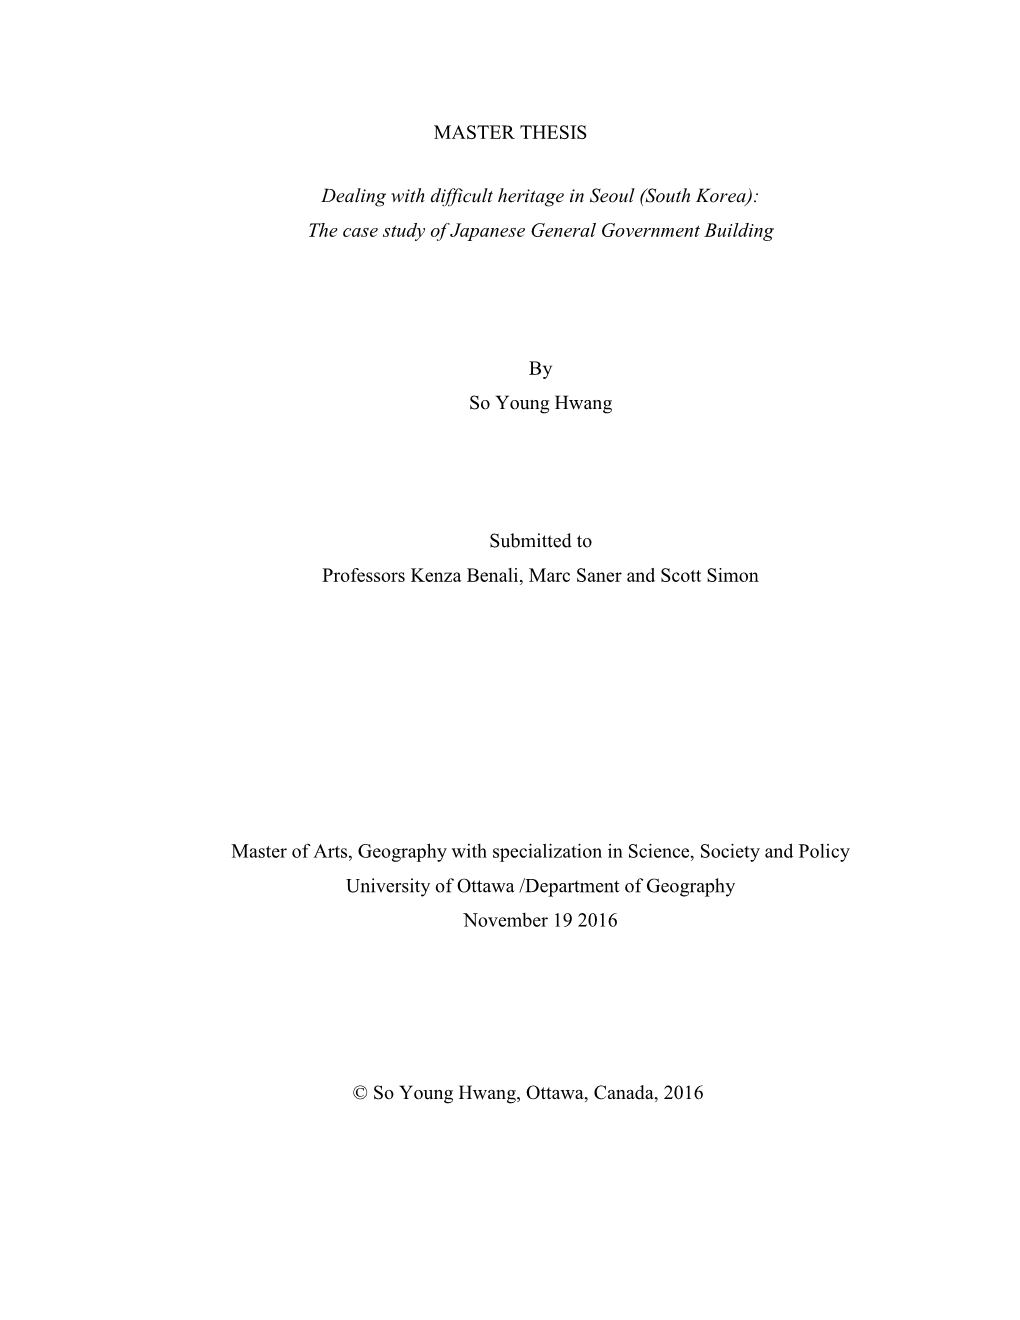 MASTER THESIS Dealing with Difficult Heritage in Seoul